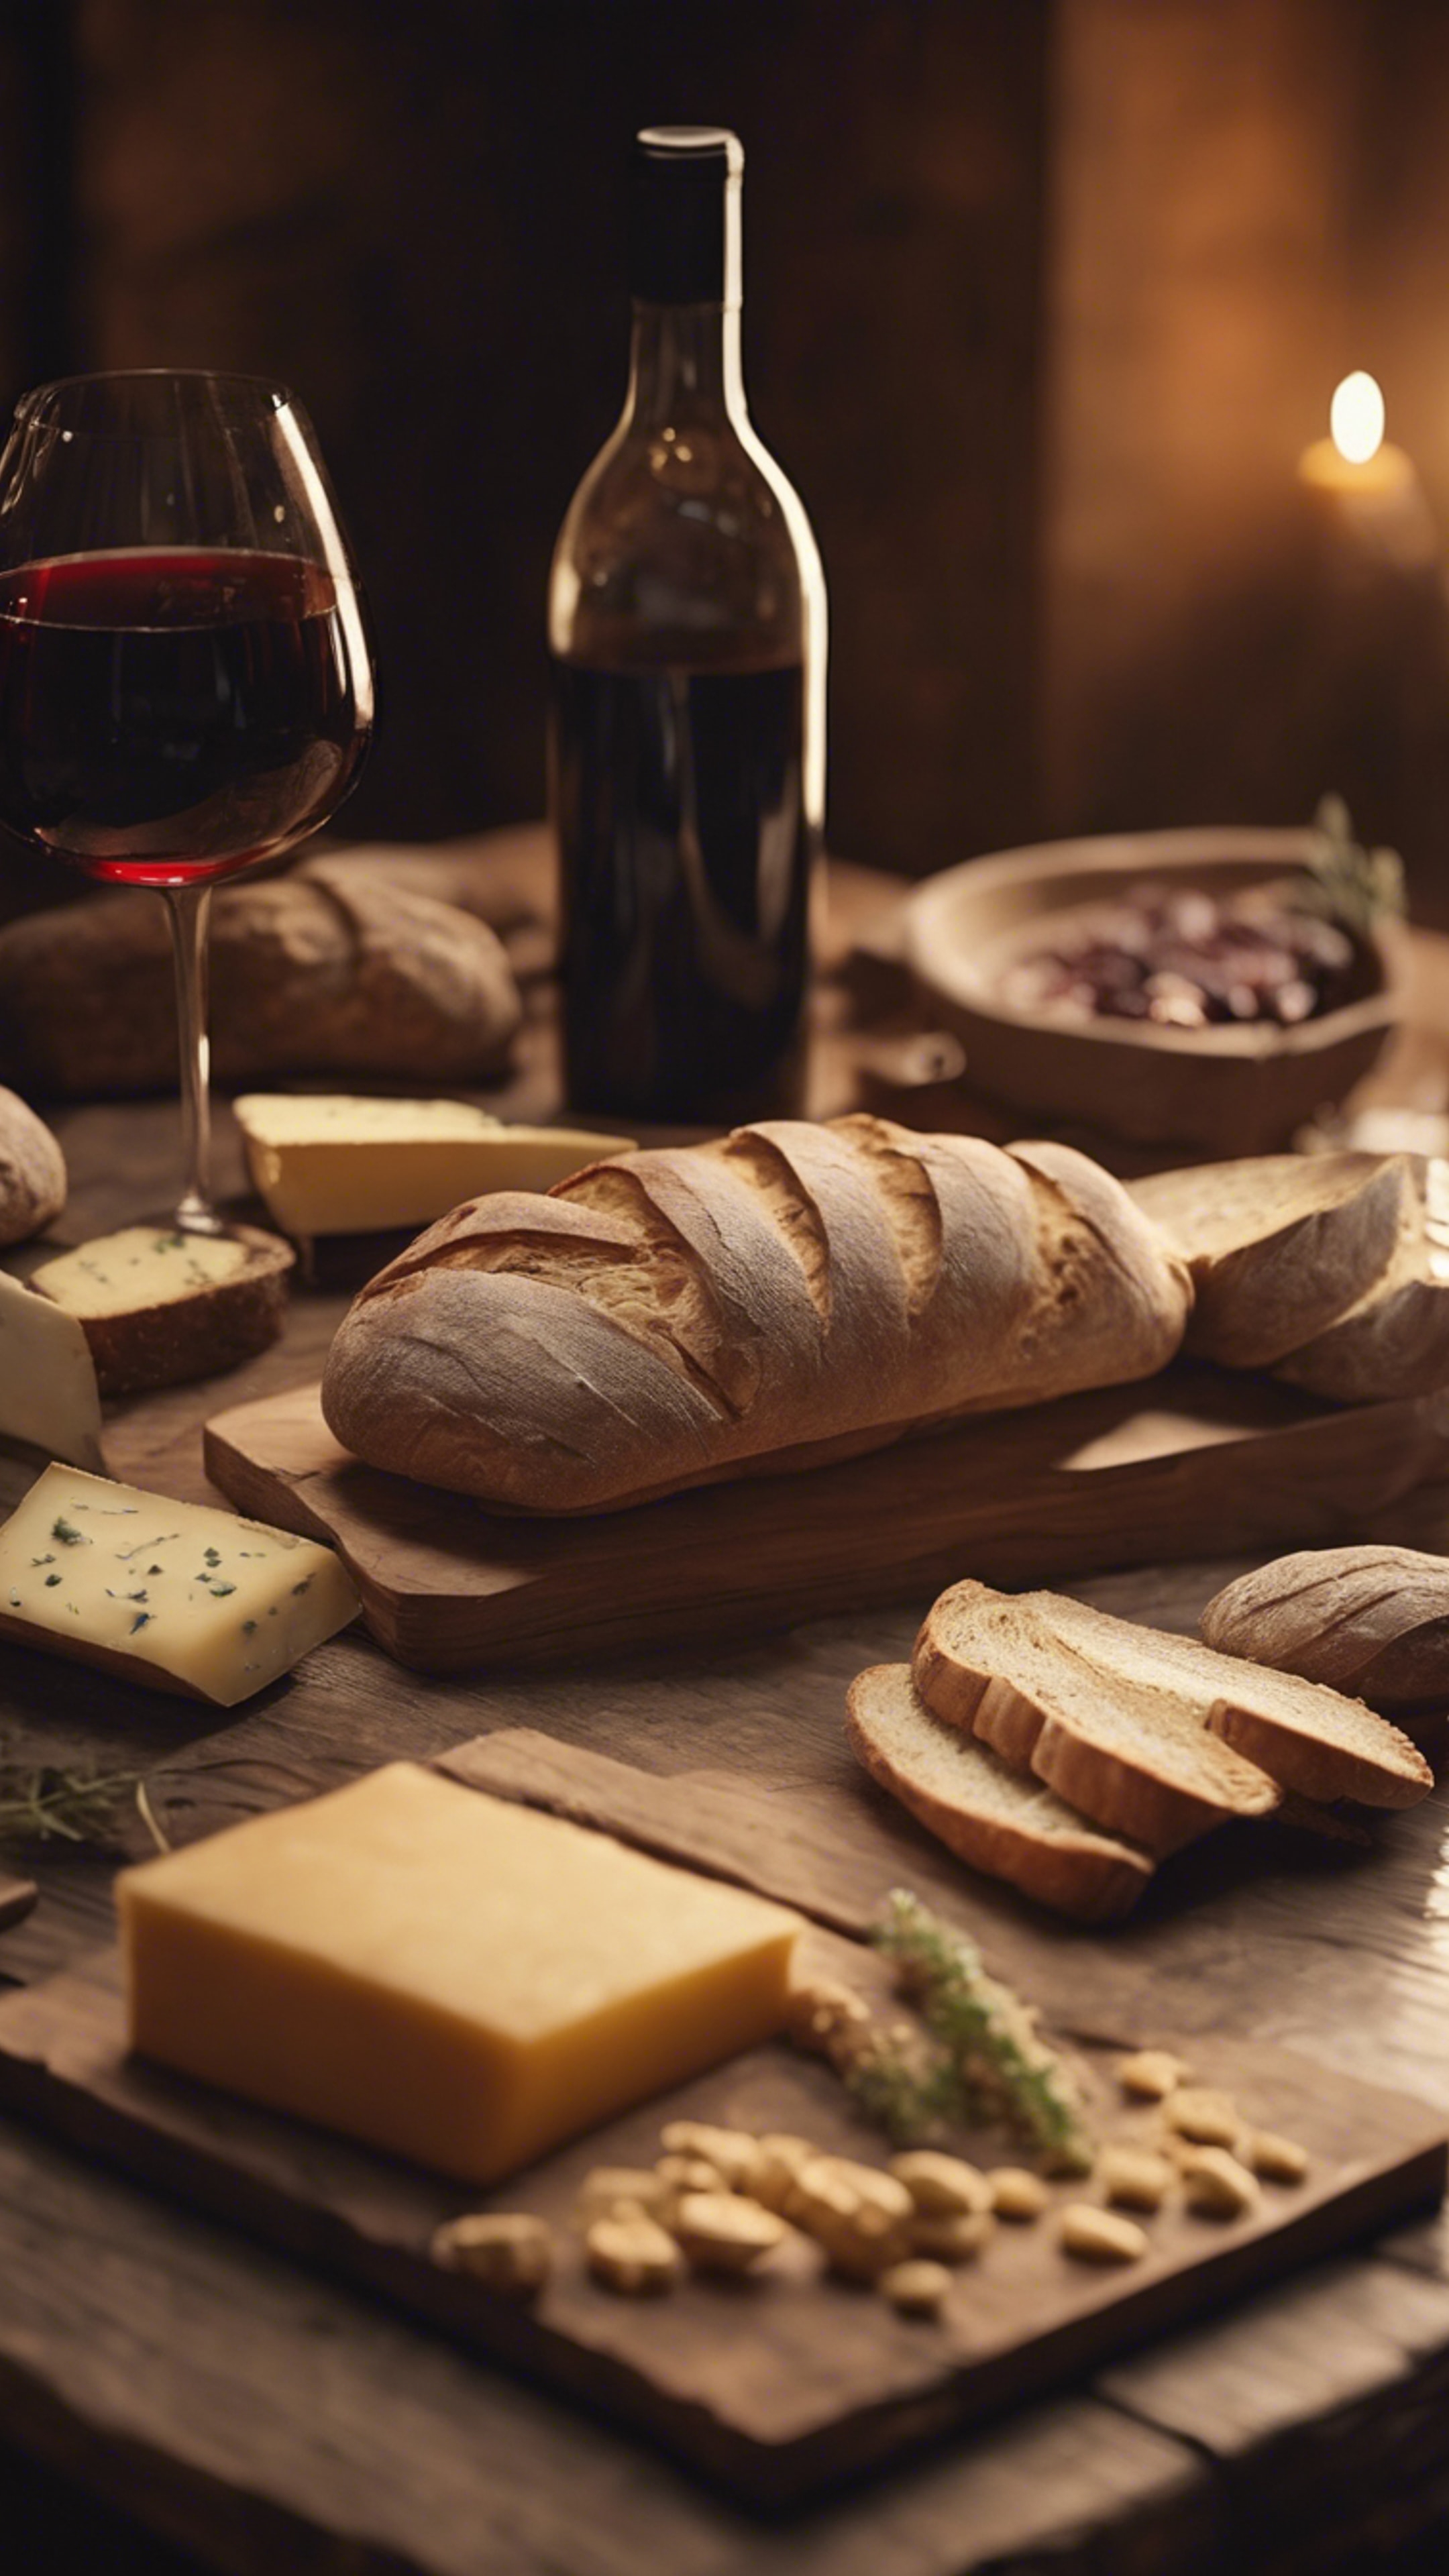 Detailed close-up of a rustic French country-style wooden table set with fresh bread, wine, and cheese under warm interior lighting. วอลล์เปเปอร์[6a74bb7d88b74d998281]